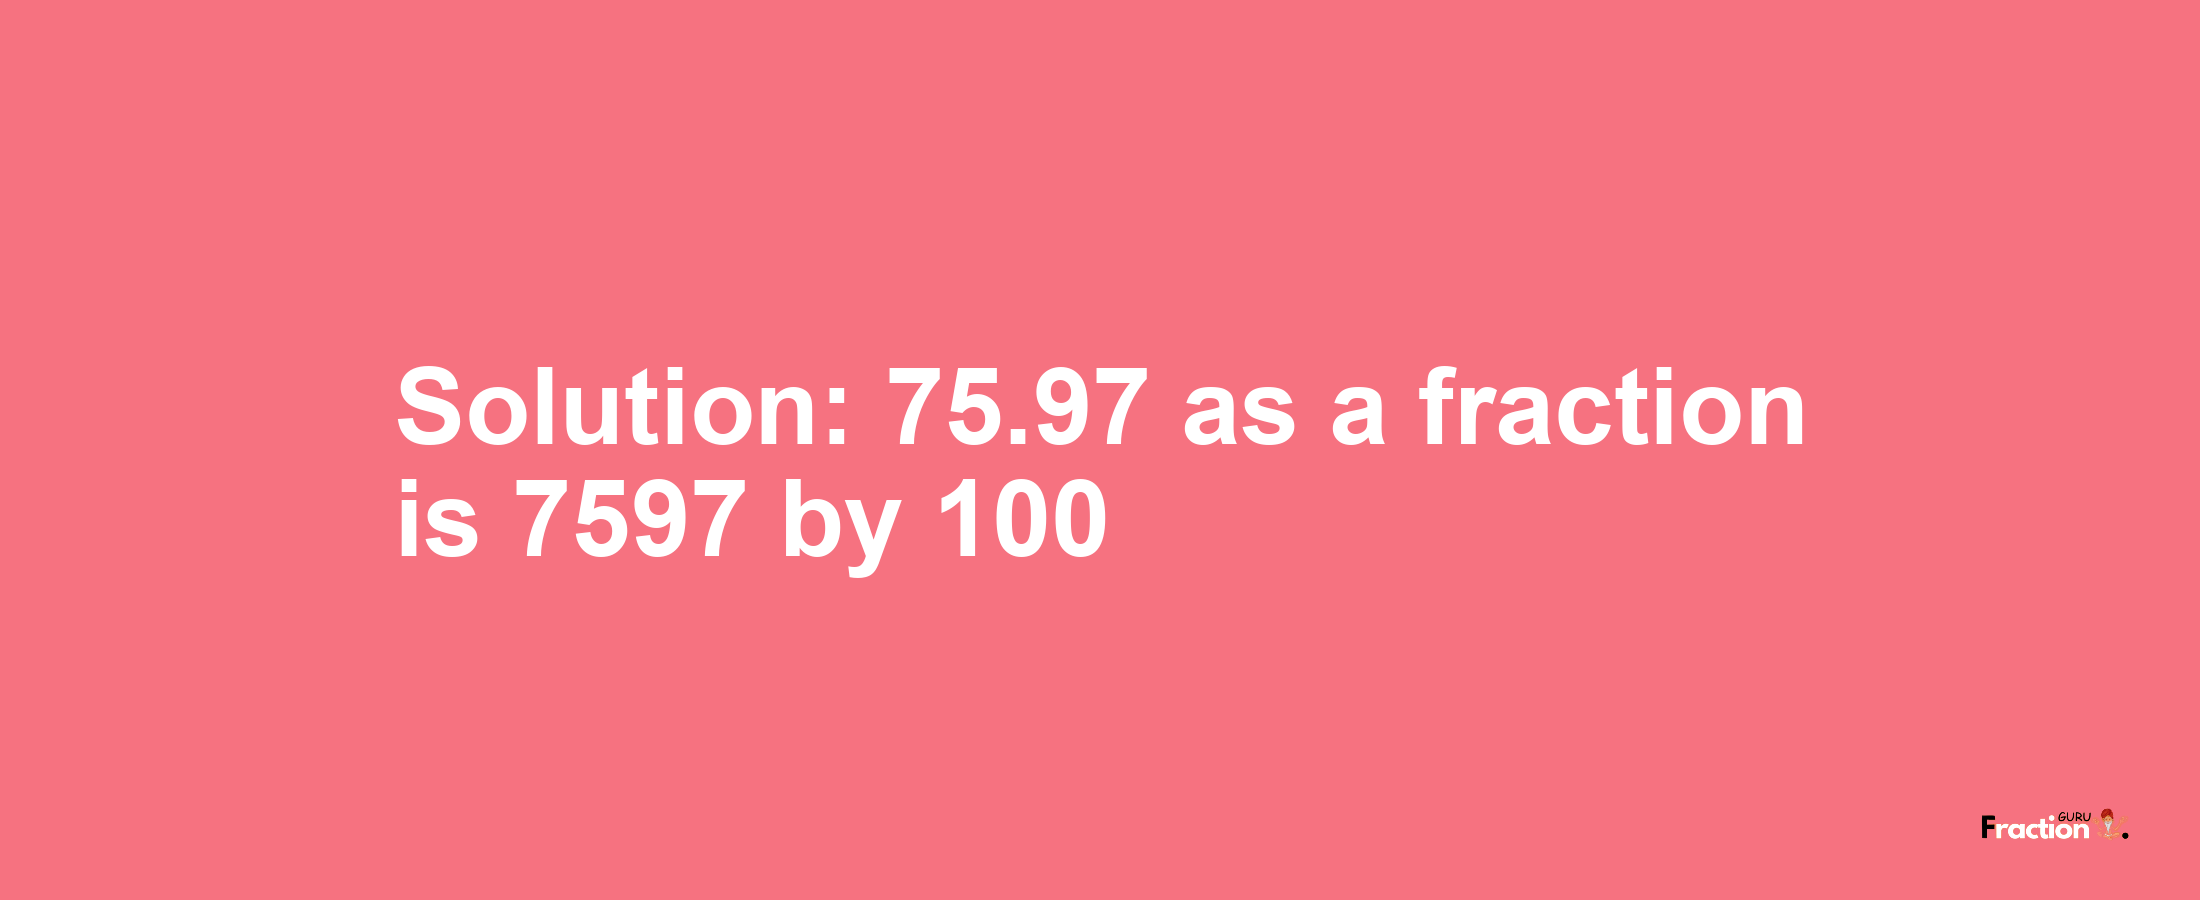 Solution:75.97 as a fraction is 7597/100